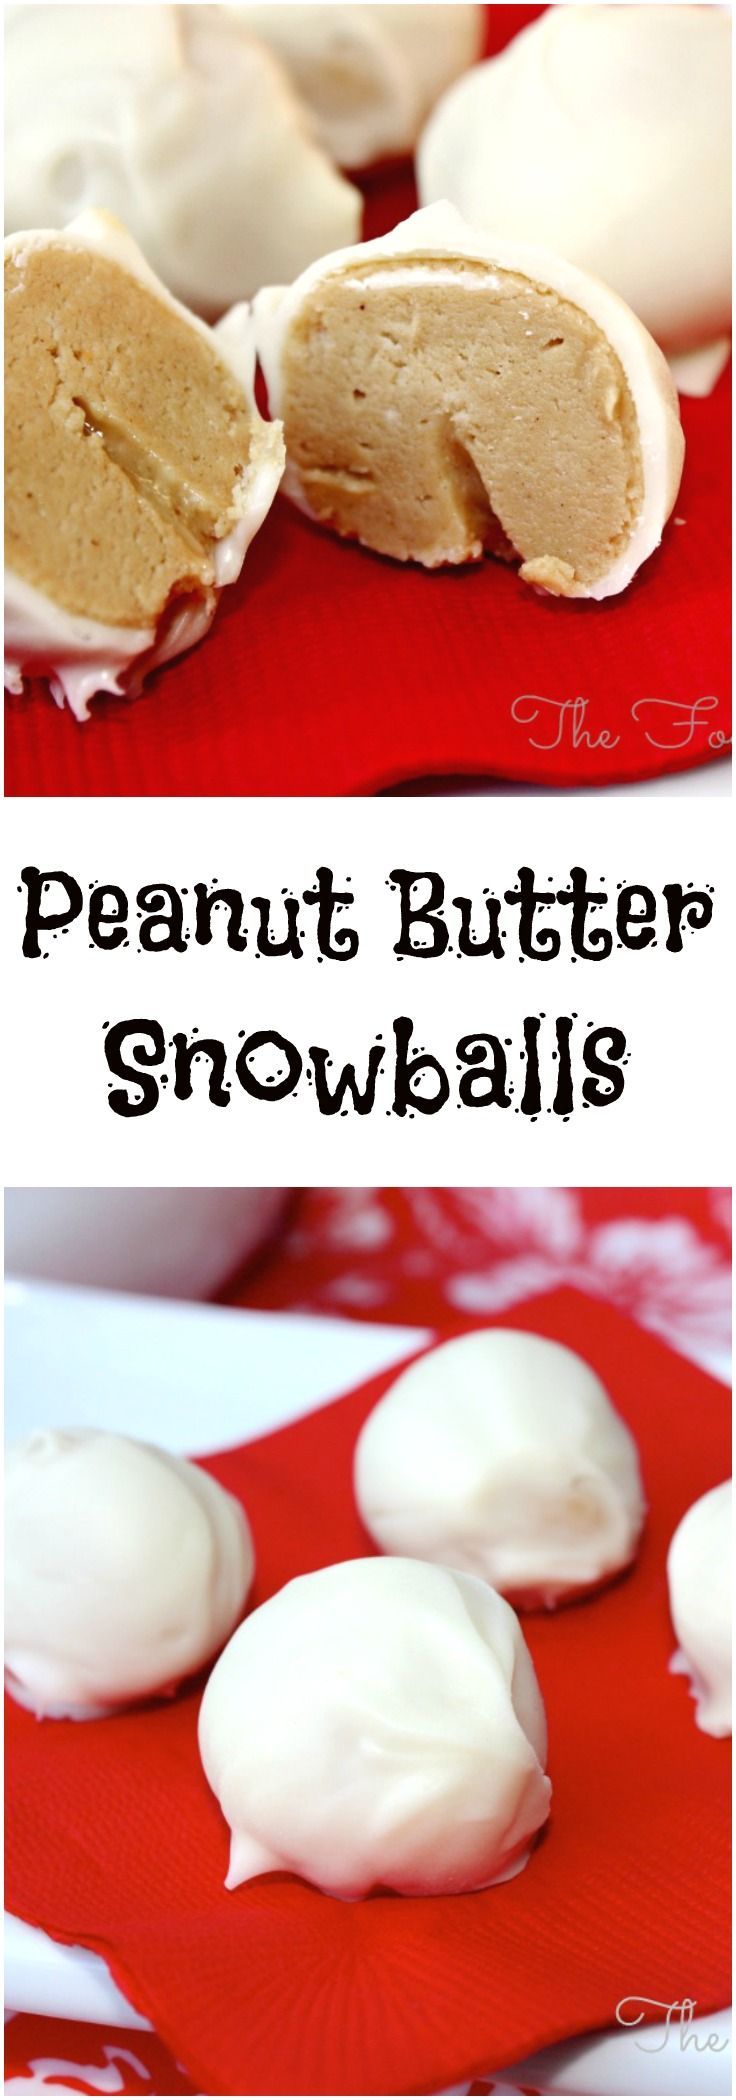 Peanut Butter Snowballs, a creamy treat dipped in white chocolate! No-baking required and just four ingred